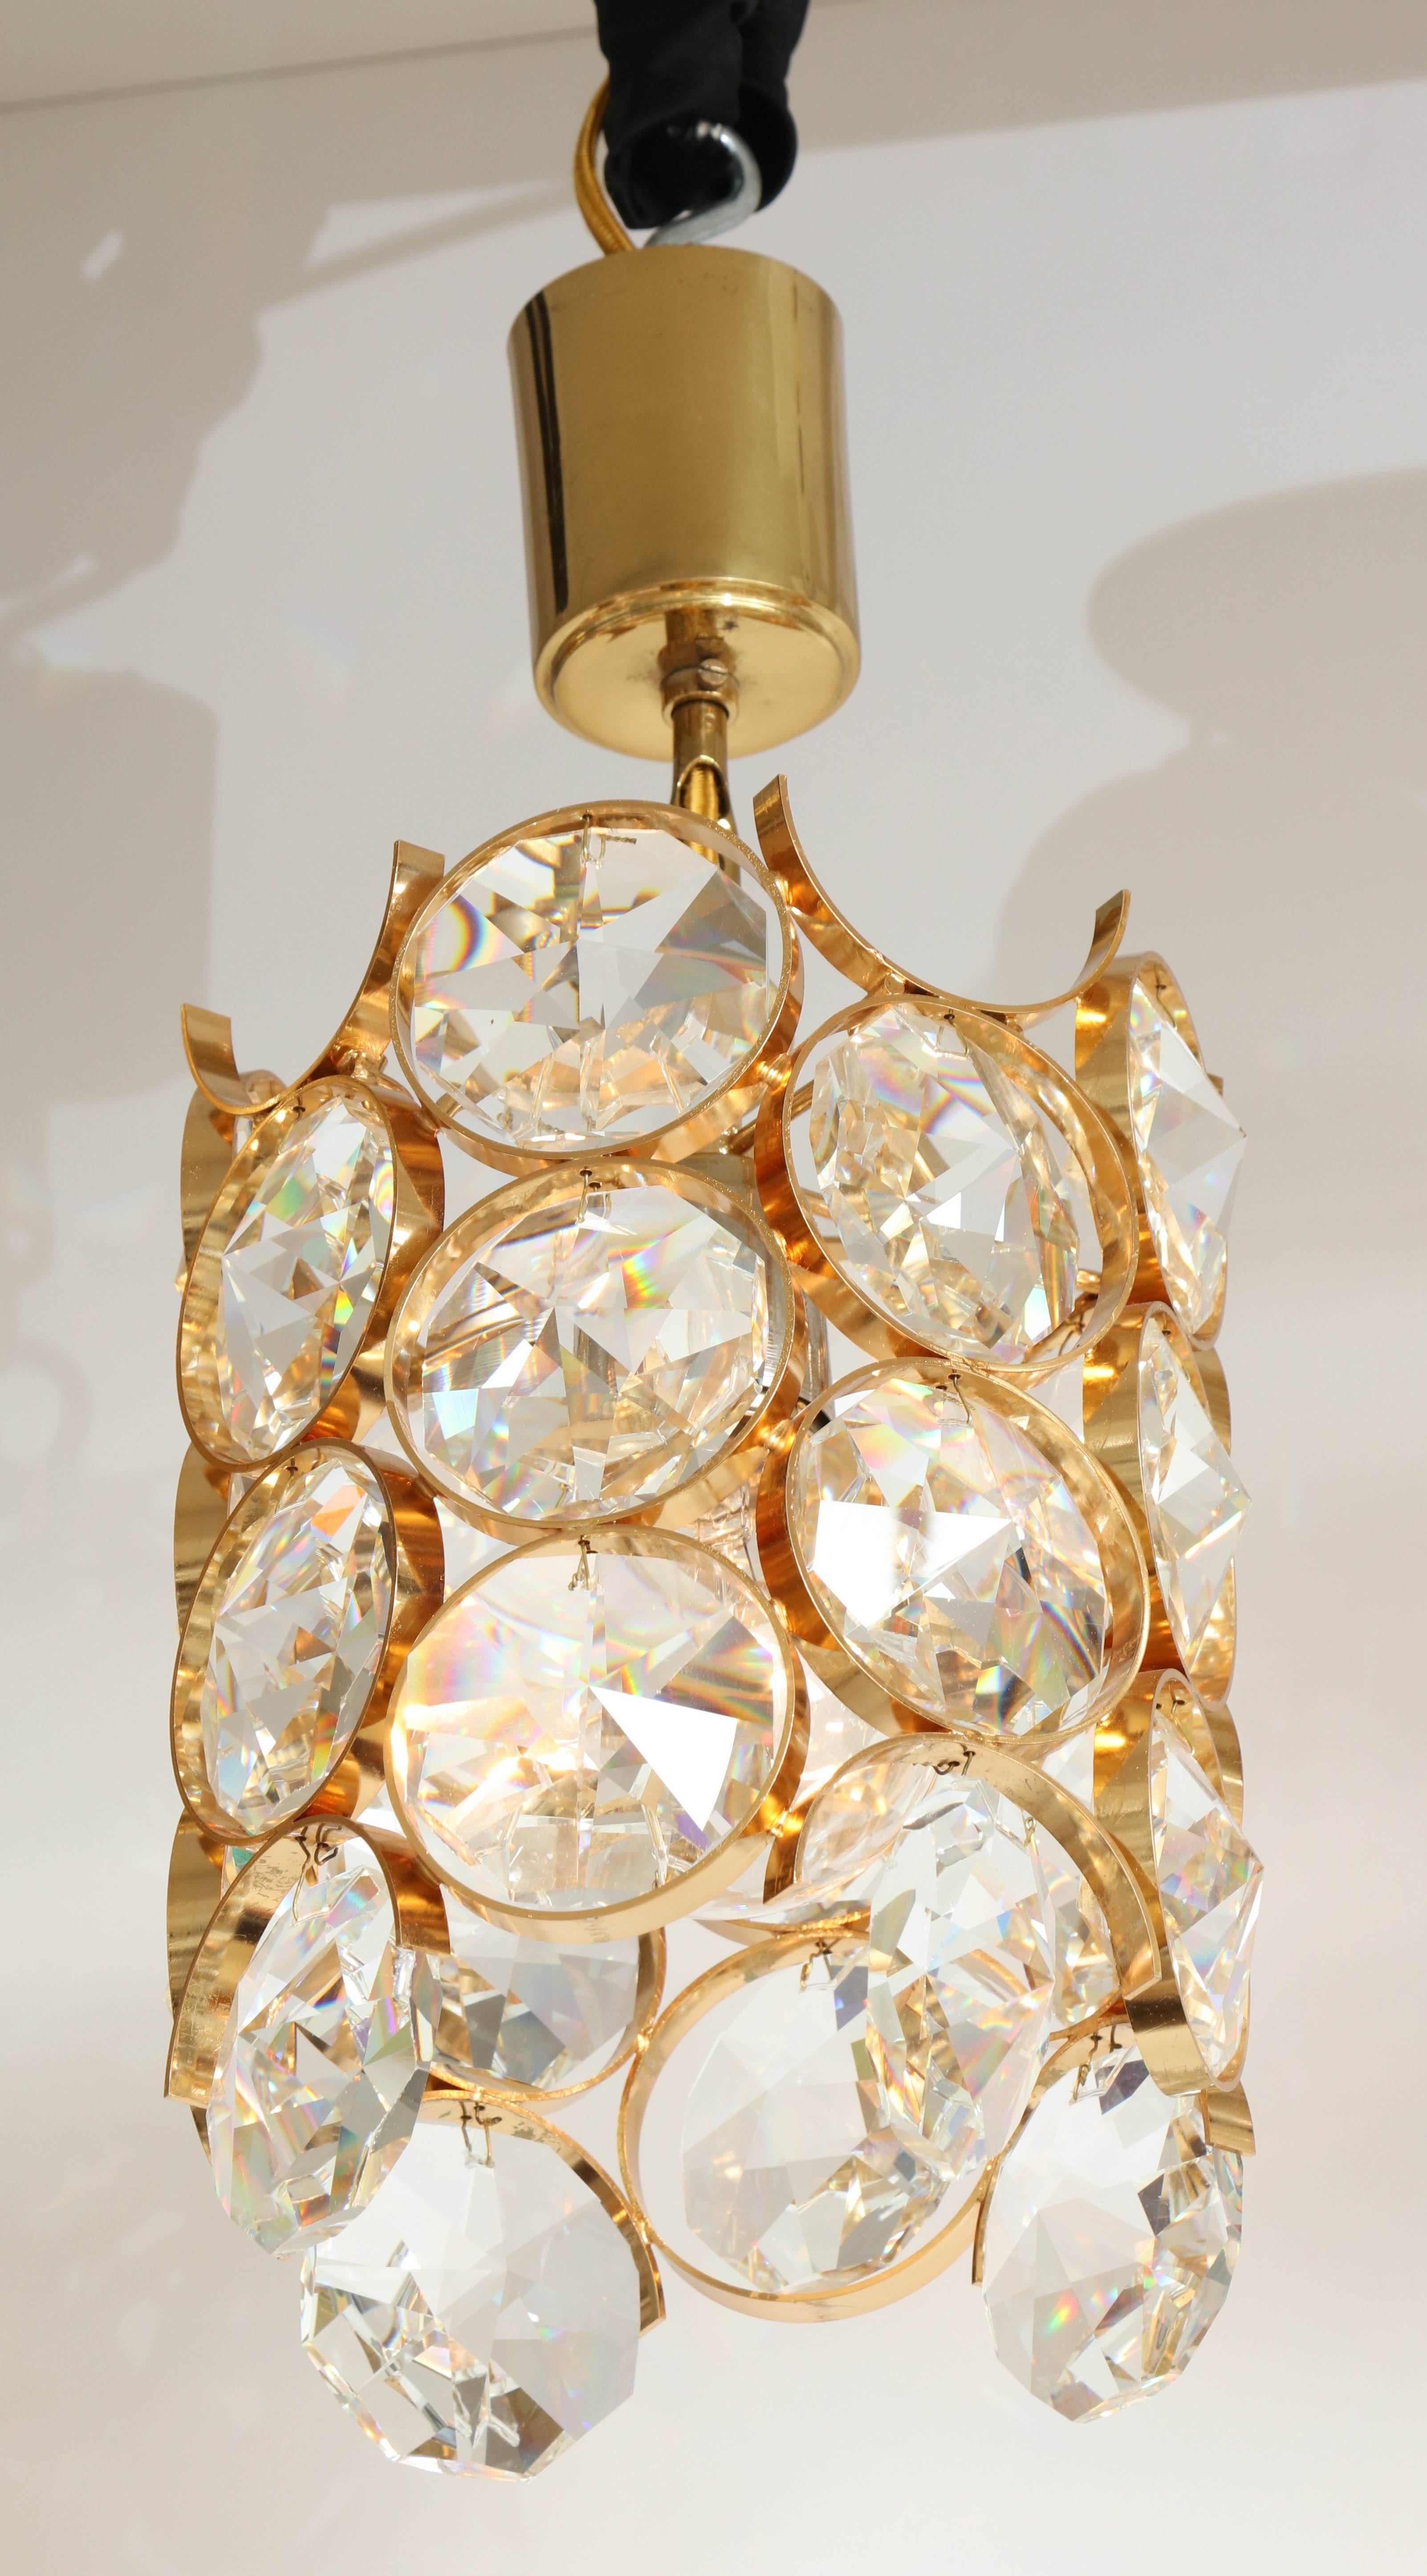 Striking pendant chandelier with large faceted crystal prisms suspended on a 22-karat gilt brass frame. Rewired for use in the USA, uses one standard bulb.